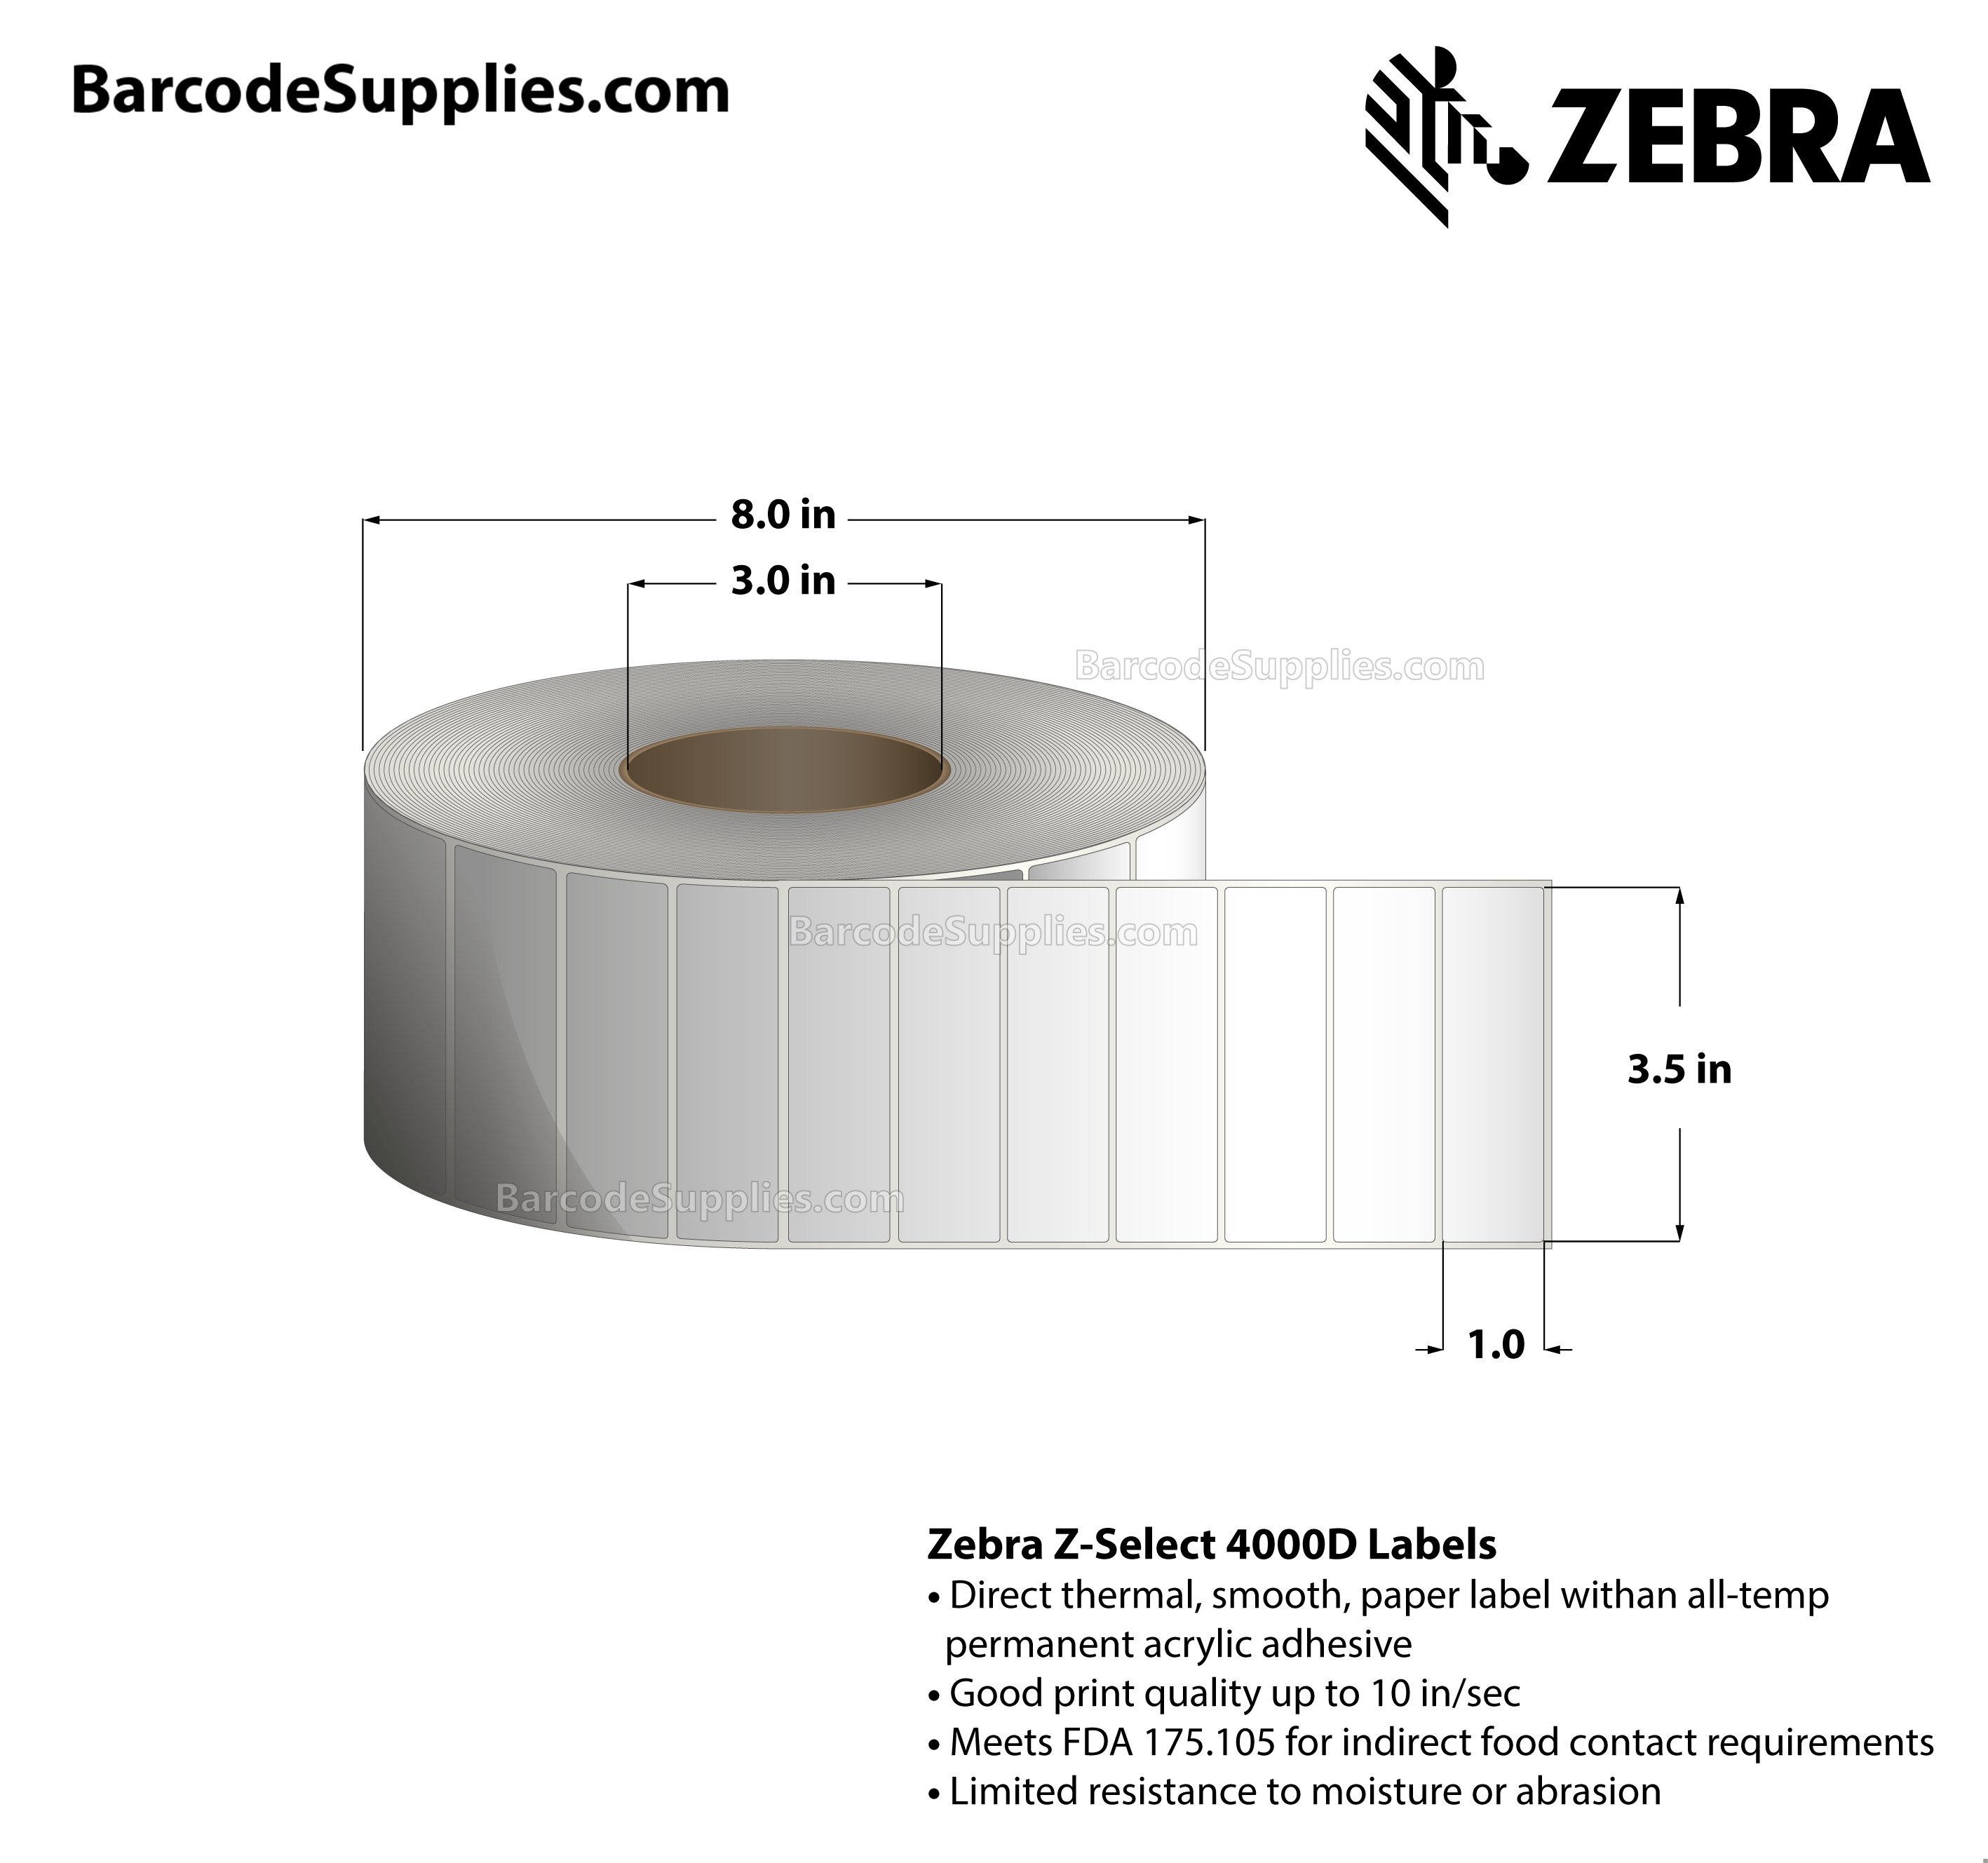 3.5 x 1 Direct Thermal White Z-Select 4000D Labels With All-Temp Adhesive - Not Perforated - 5120 Labels Per Roll - Carton Of 6 Rolls - 30720 Labels Total - MPN: 75856